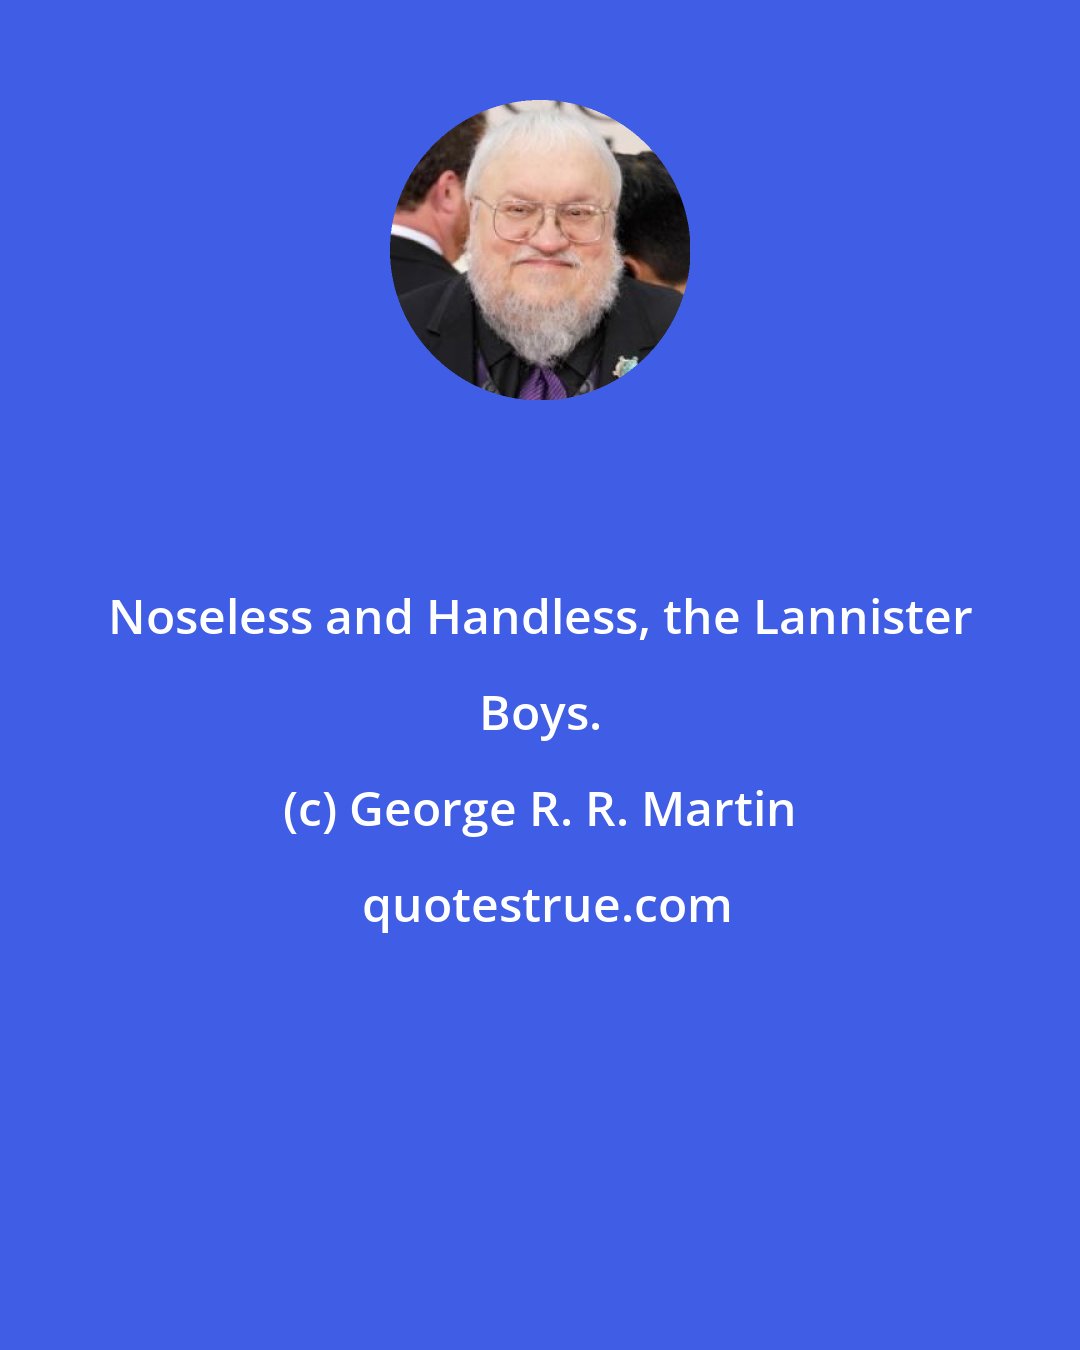 George R. R. Martin: Noseless and Handless, the Lannister Boys.